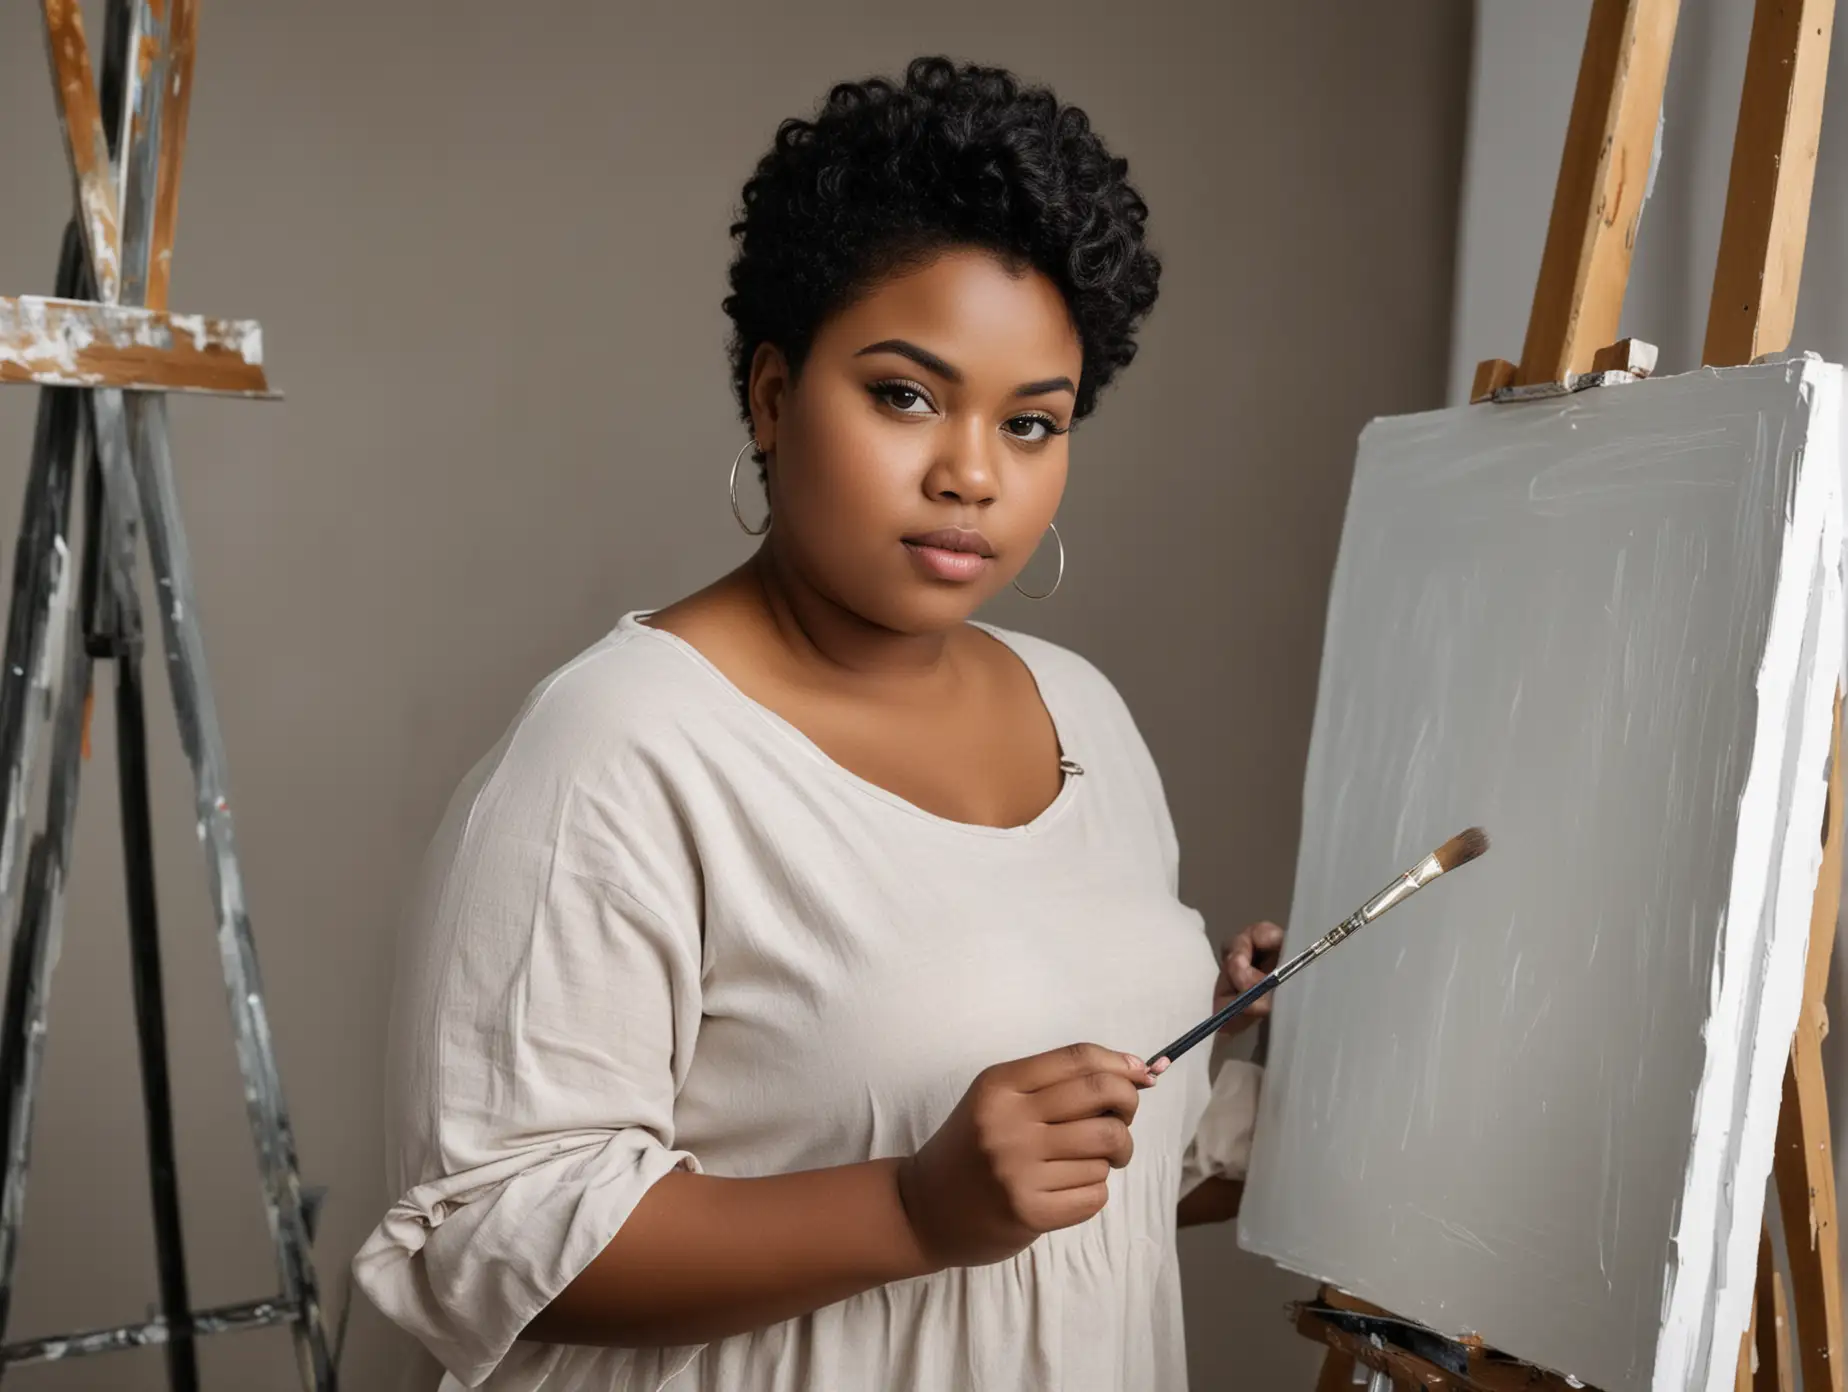 Overweight Black Girl Painting on Easel Creative Artistry in Natural Beauty